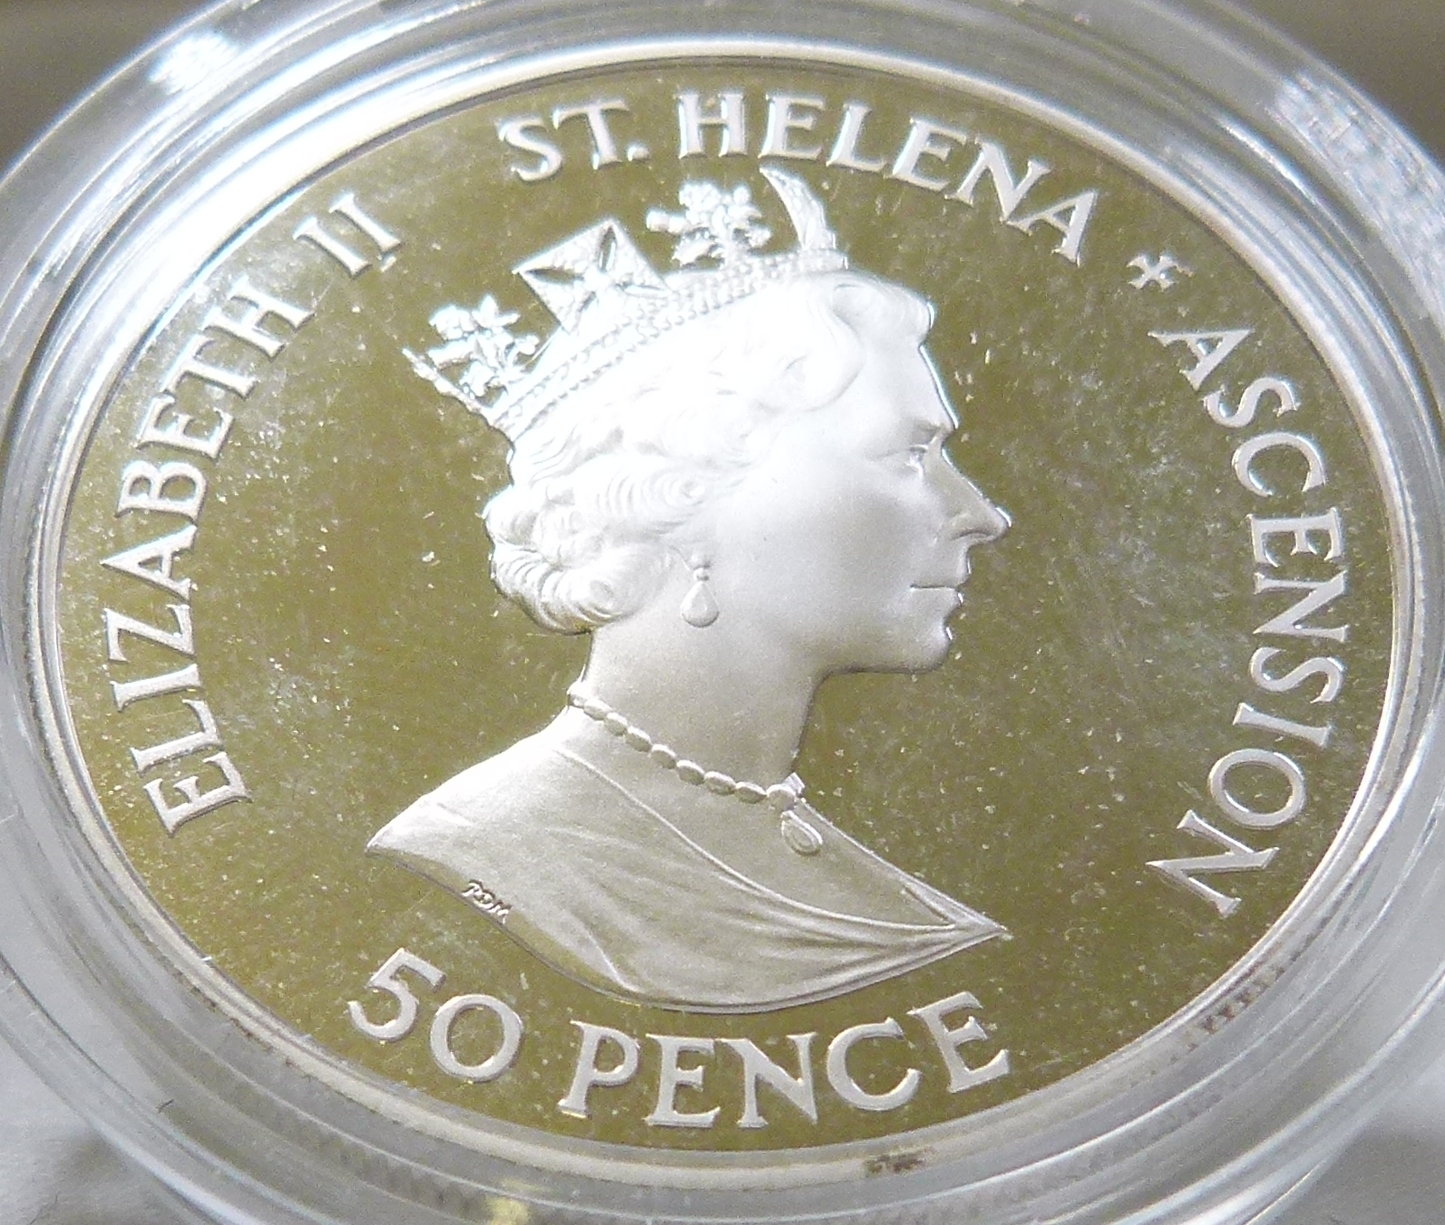 ST HELENA PROOF CROWN. - Image 2 of 2